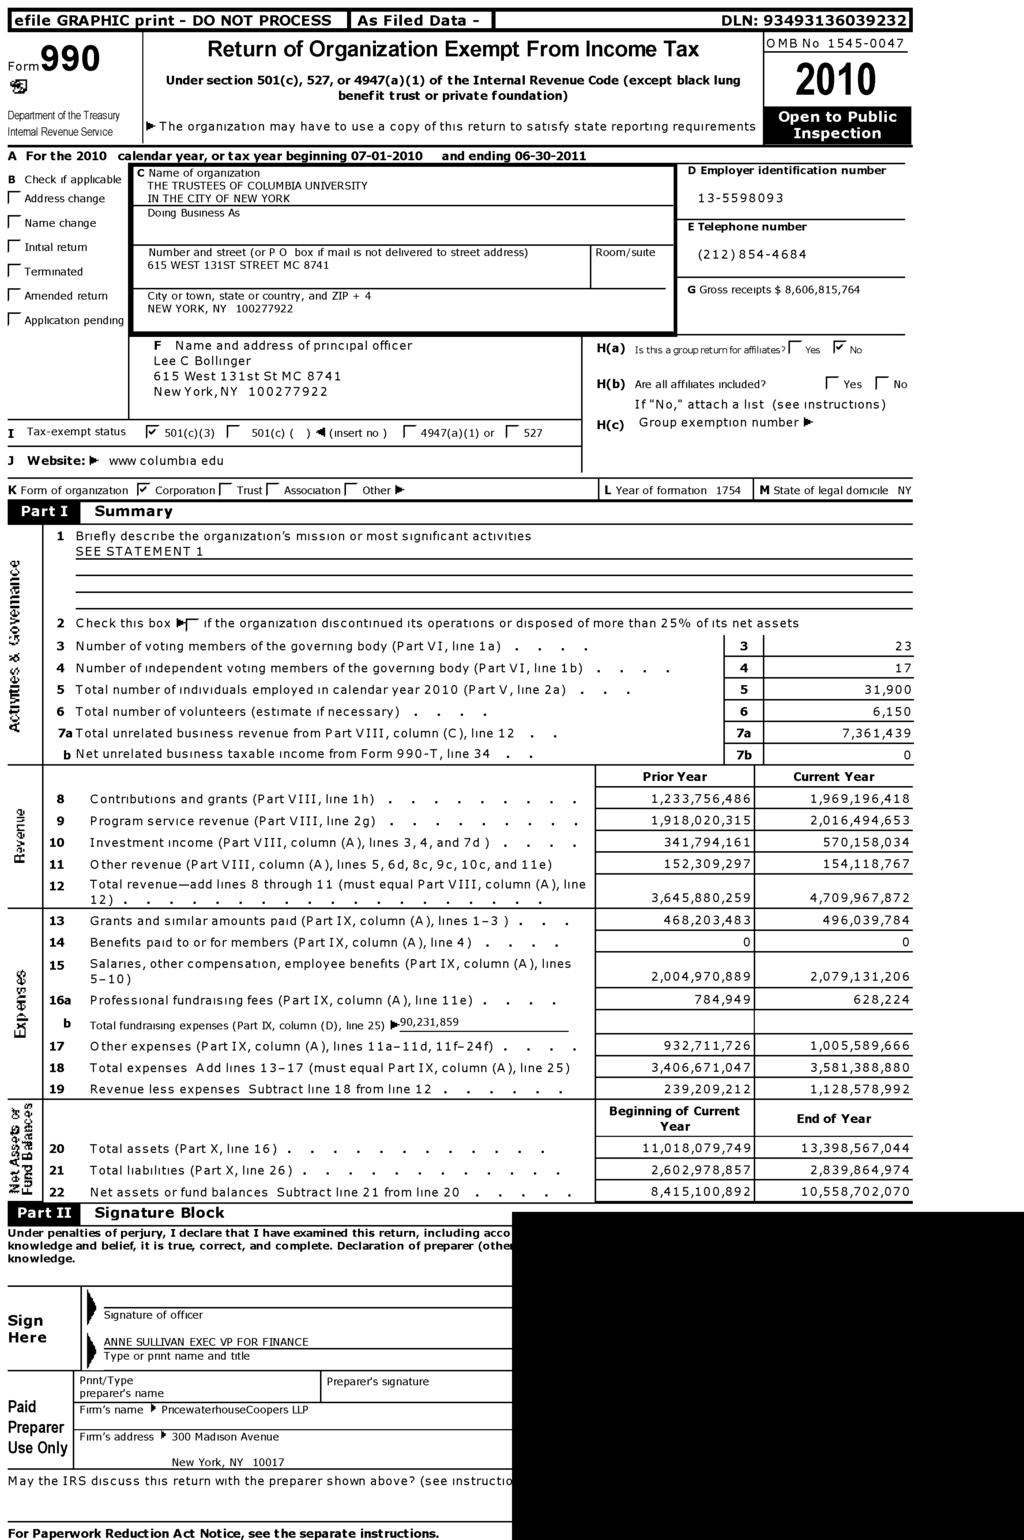 l efile GRAPHIC p rint - DO NOT PROCESS As Filed Data - DLN: 93493136039232 OMB No 1545-0047 Return of Organization Exempt From Income Tax Form 990 Under section 501 (c), 527, or 4947 ( a)(1) of the